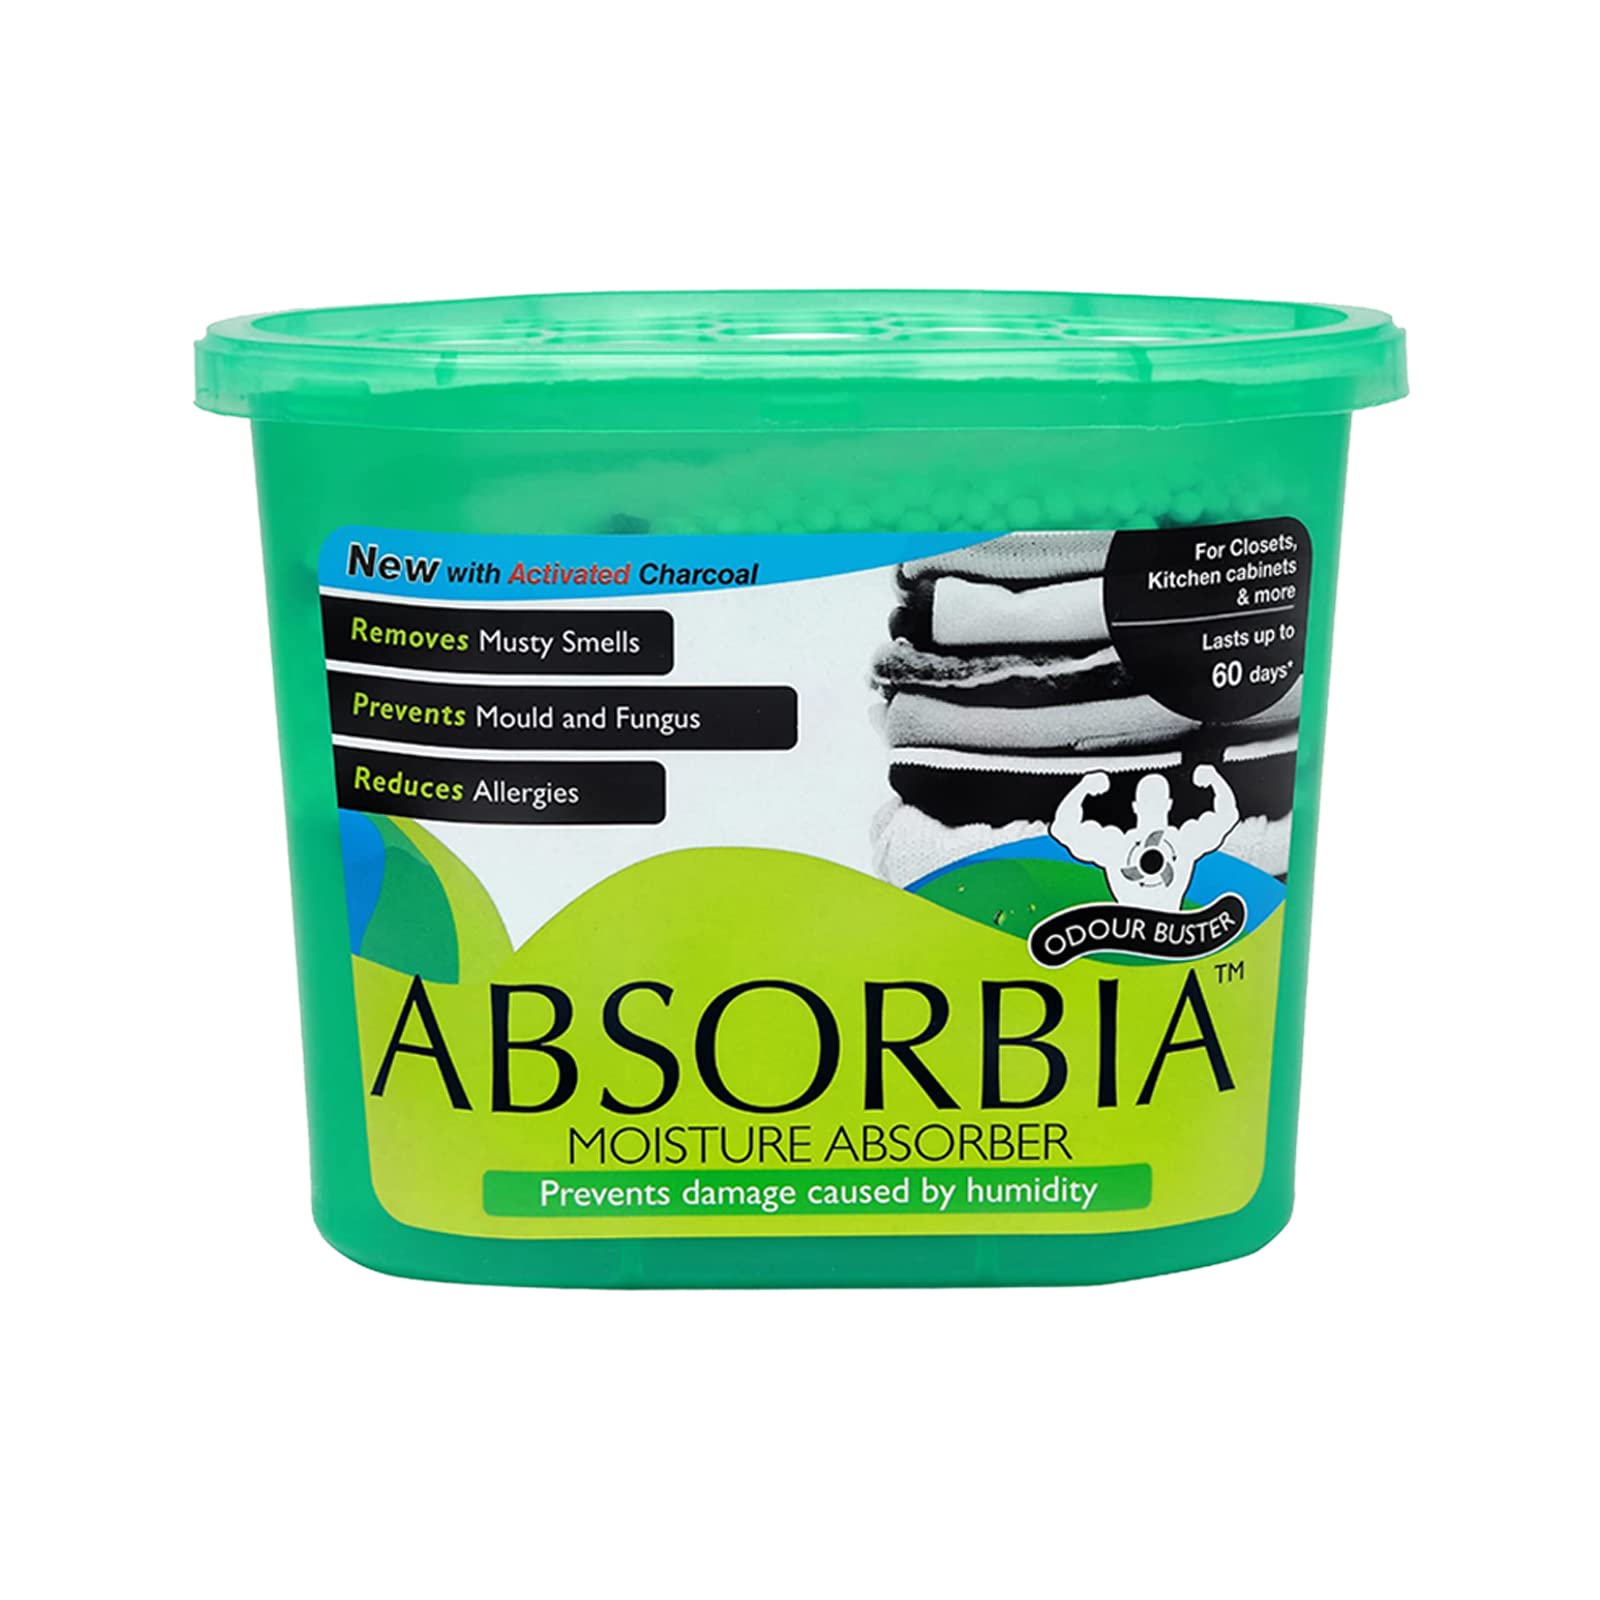 Wasabia Natural Moisture Absorber